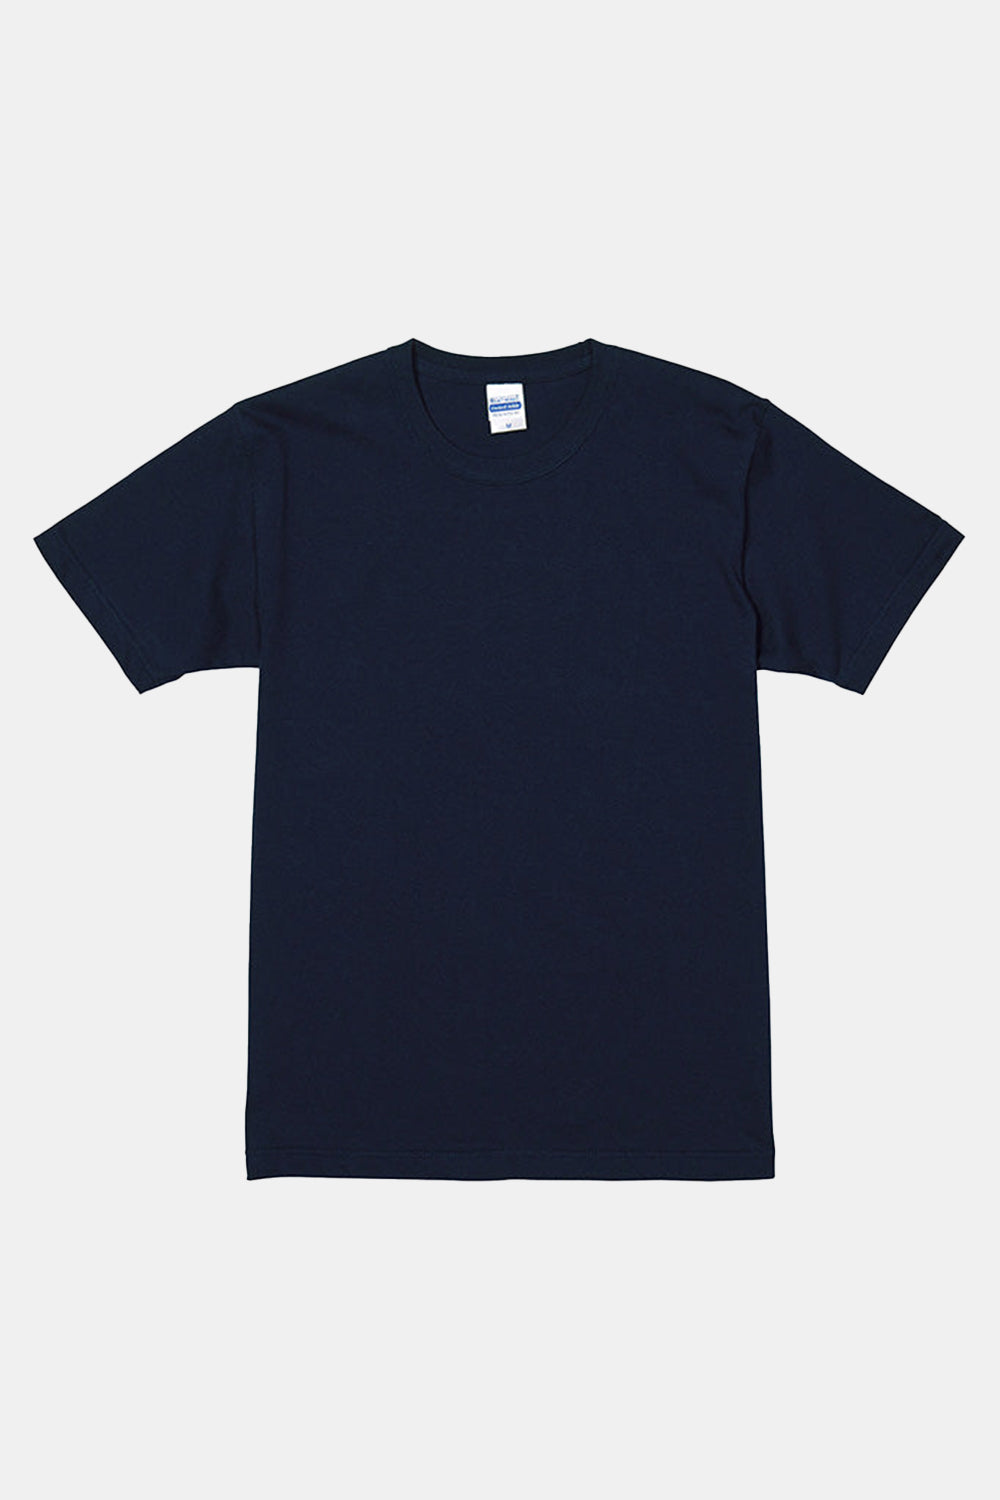 United Athle 4252 Authentic Super Heavyweight 7.1oz T-shirt (Navy)
